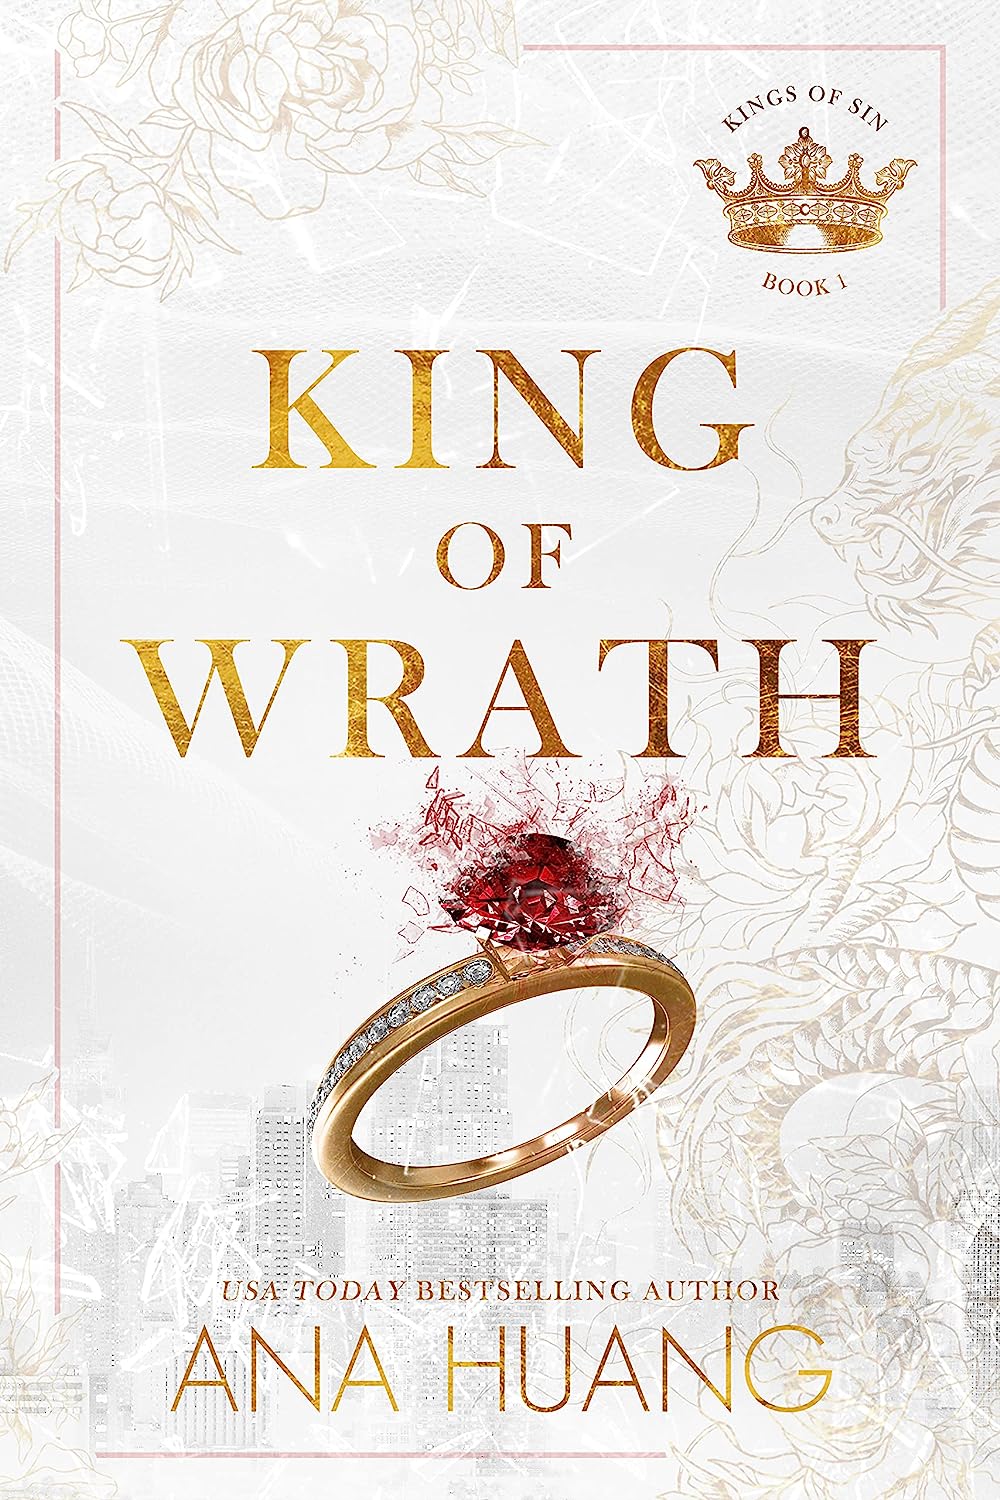 King of Wrath: An Arranged Marriage Romance (Kings of Sin Book 1) by Ana Huang